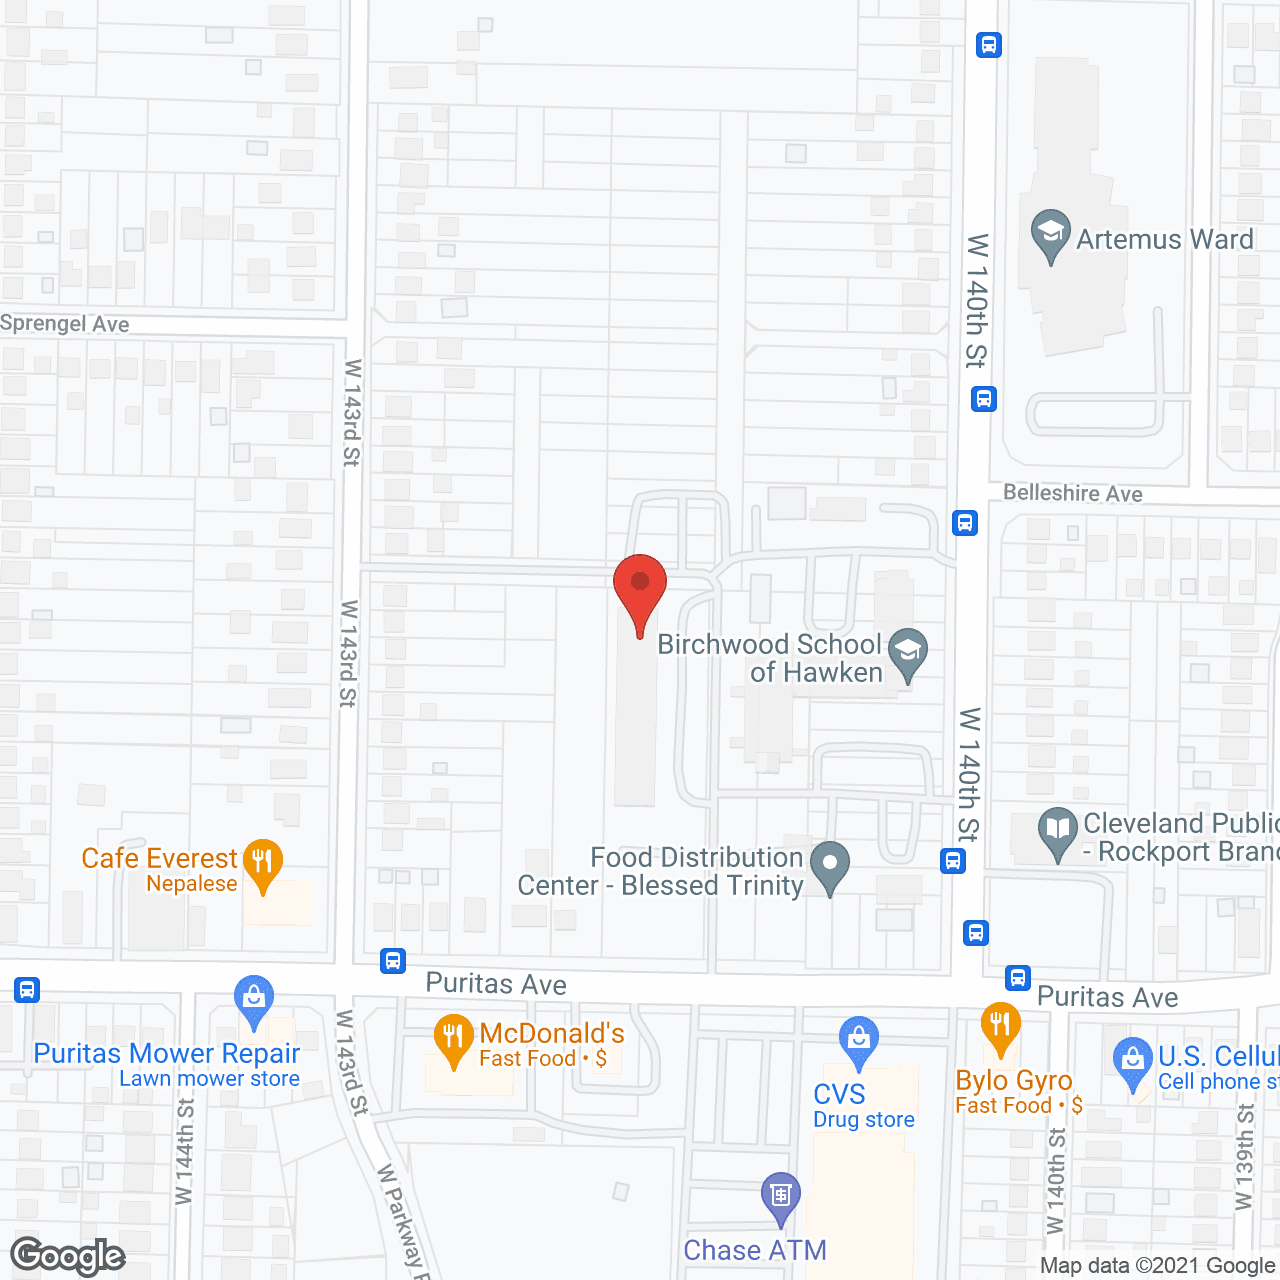 Ascension Village Apartments in google map